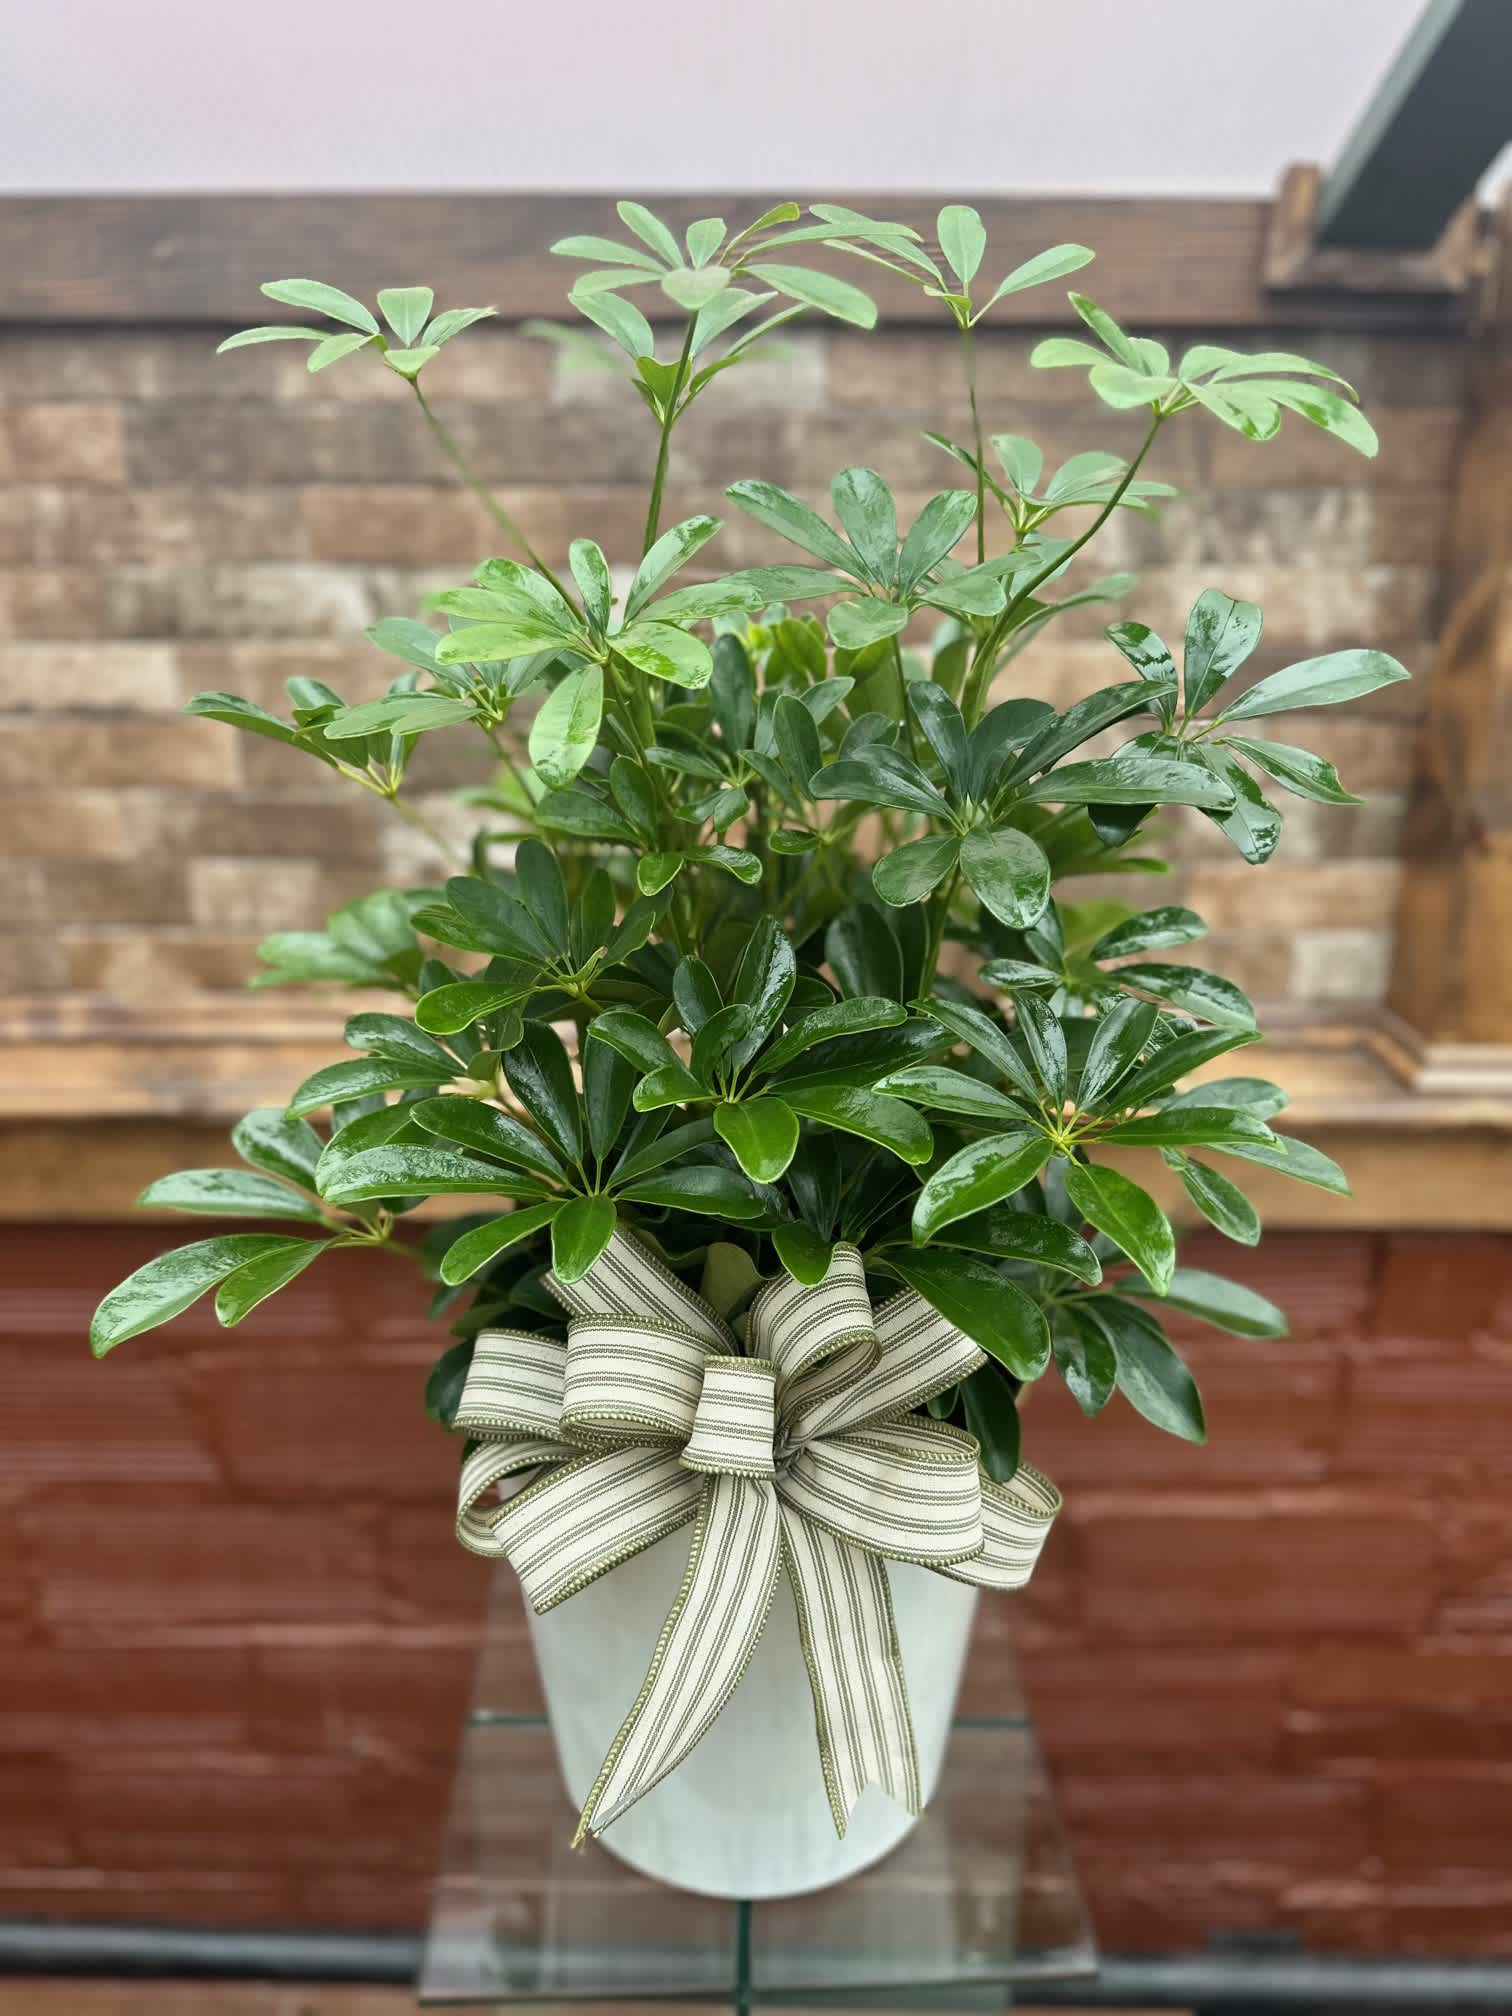 8&quot; Schefflera Arboricola - Schefflera Arboricola, or more commonly known as a Dwarf Umbrella Tree, is a lush and vibrant way to bring nature into any space. This incredible plant displays its beautiful foliage presented in a round graphite container for a look of modern sophistication, making it an ideal plant suited to fit into any interior decor. 